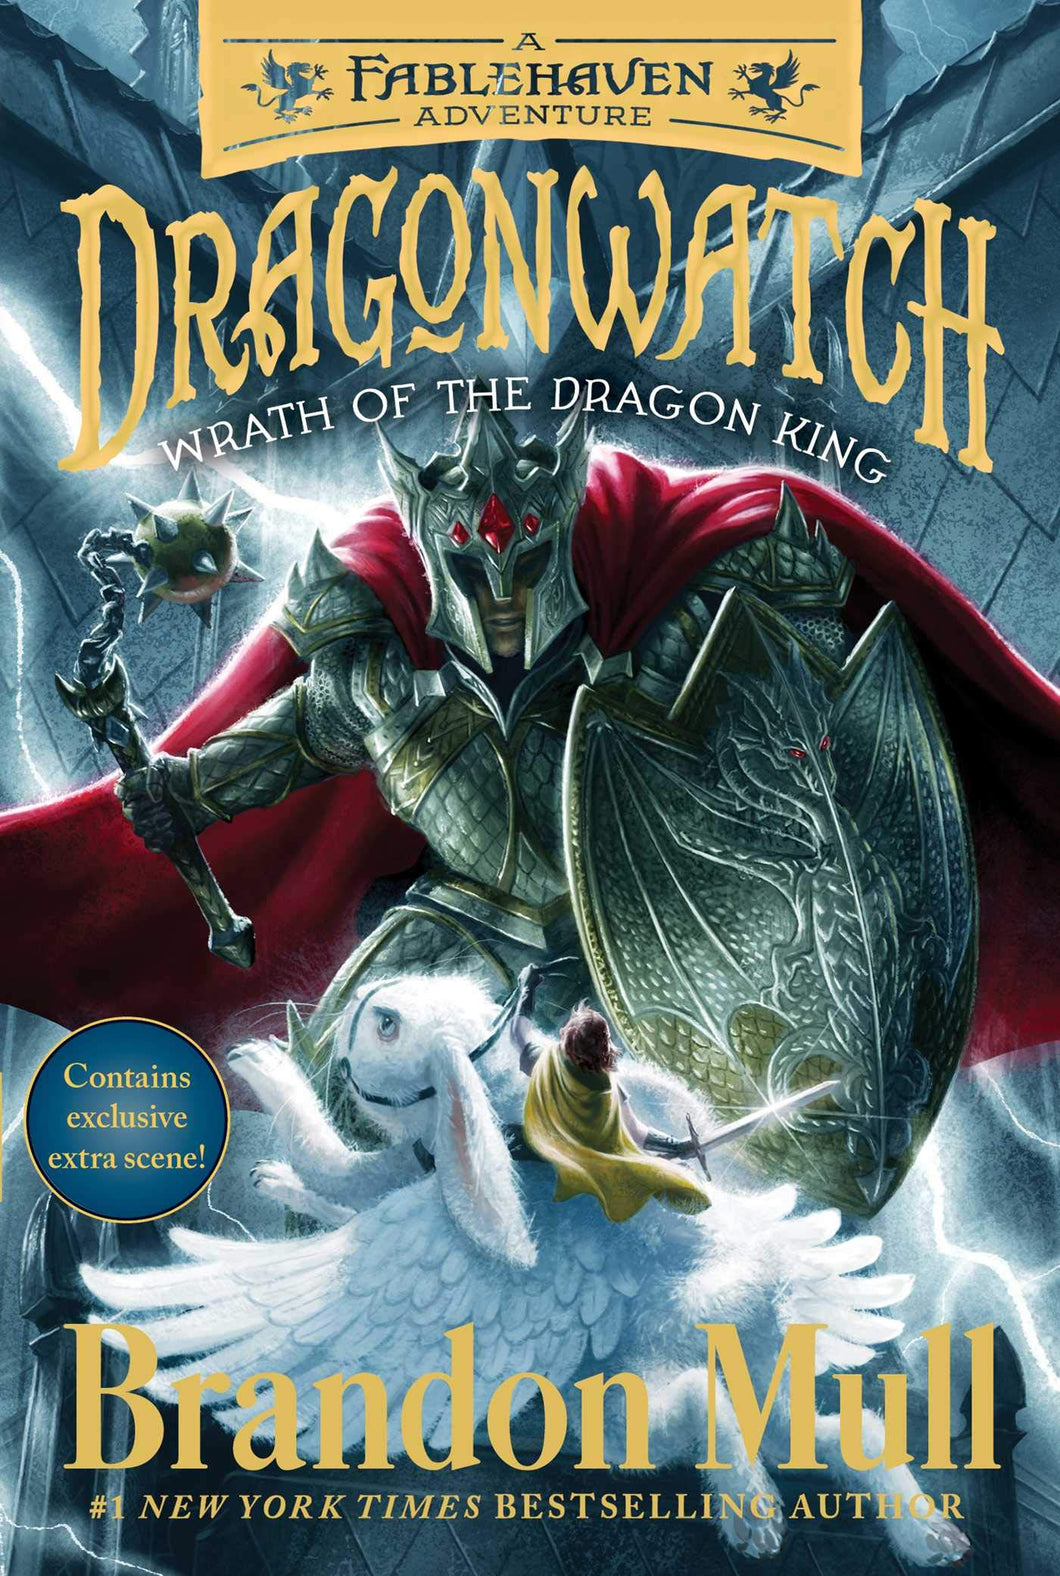 Wrath of the Dragon King (Dragonwatch Book 2)